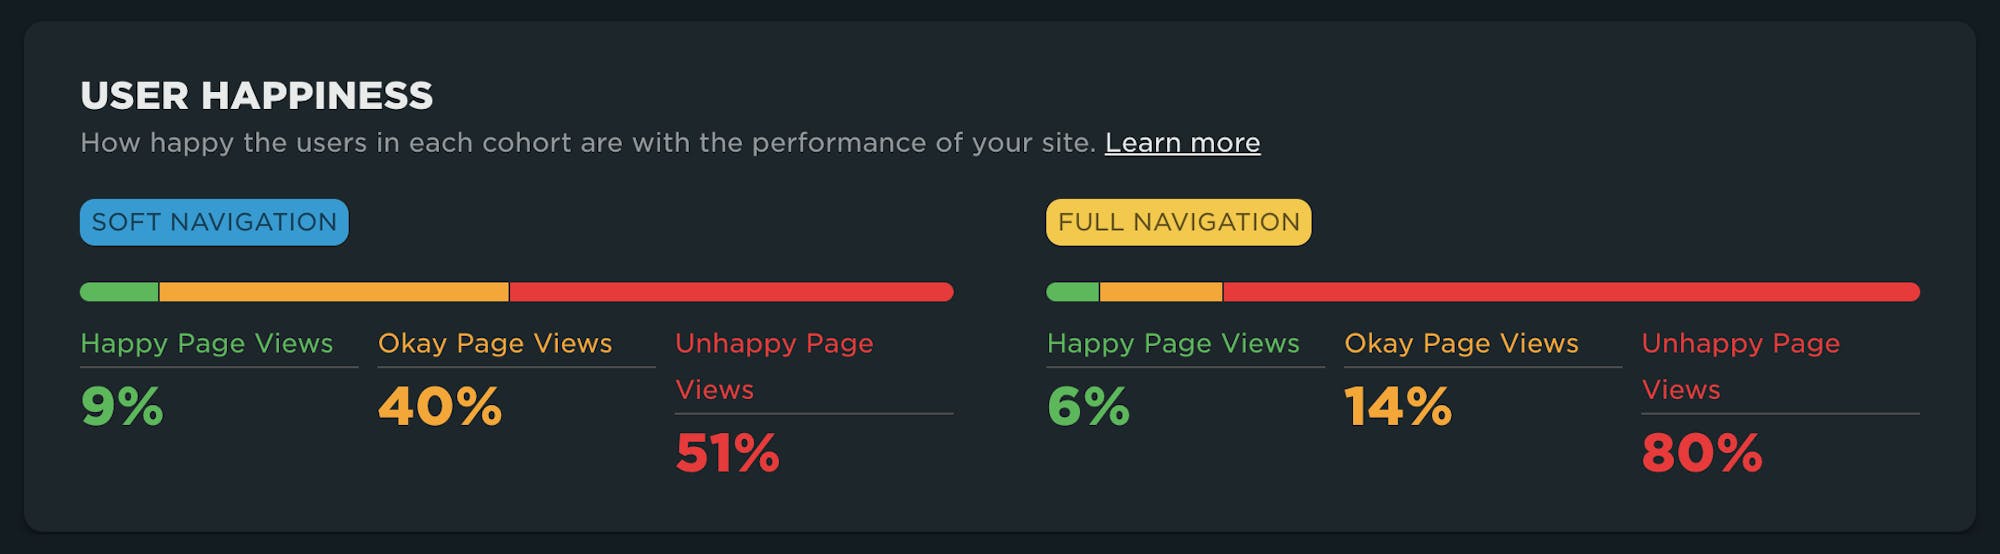 User happiness comparison between a soft and hard navigation showing more happy users for the soft nav